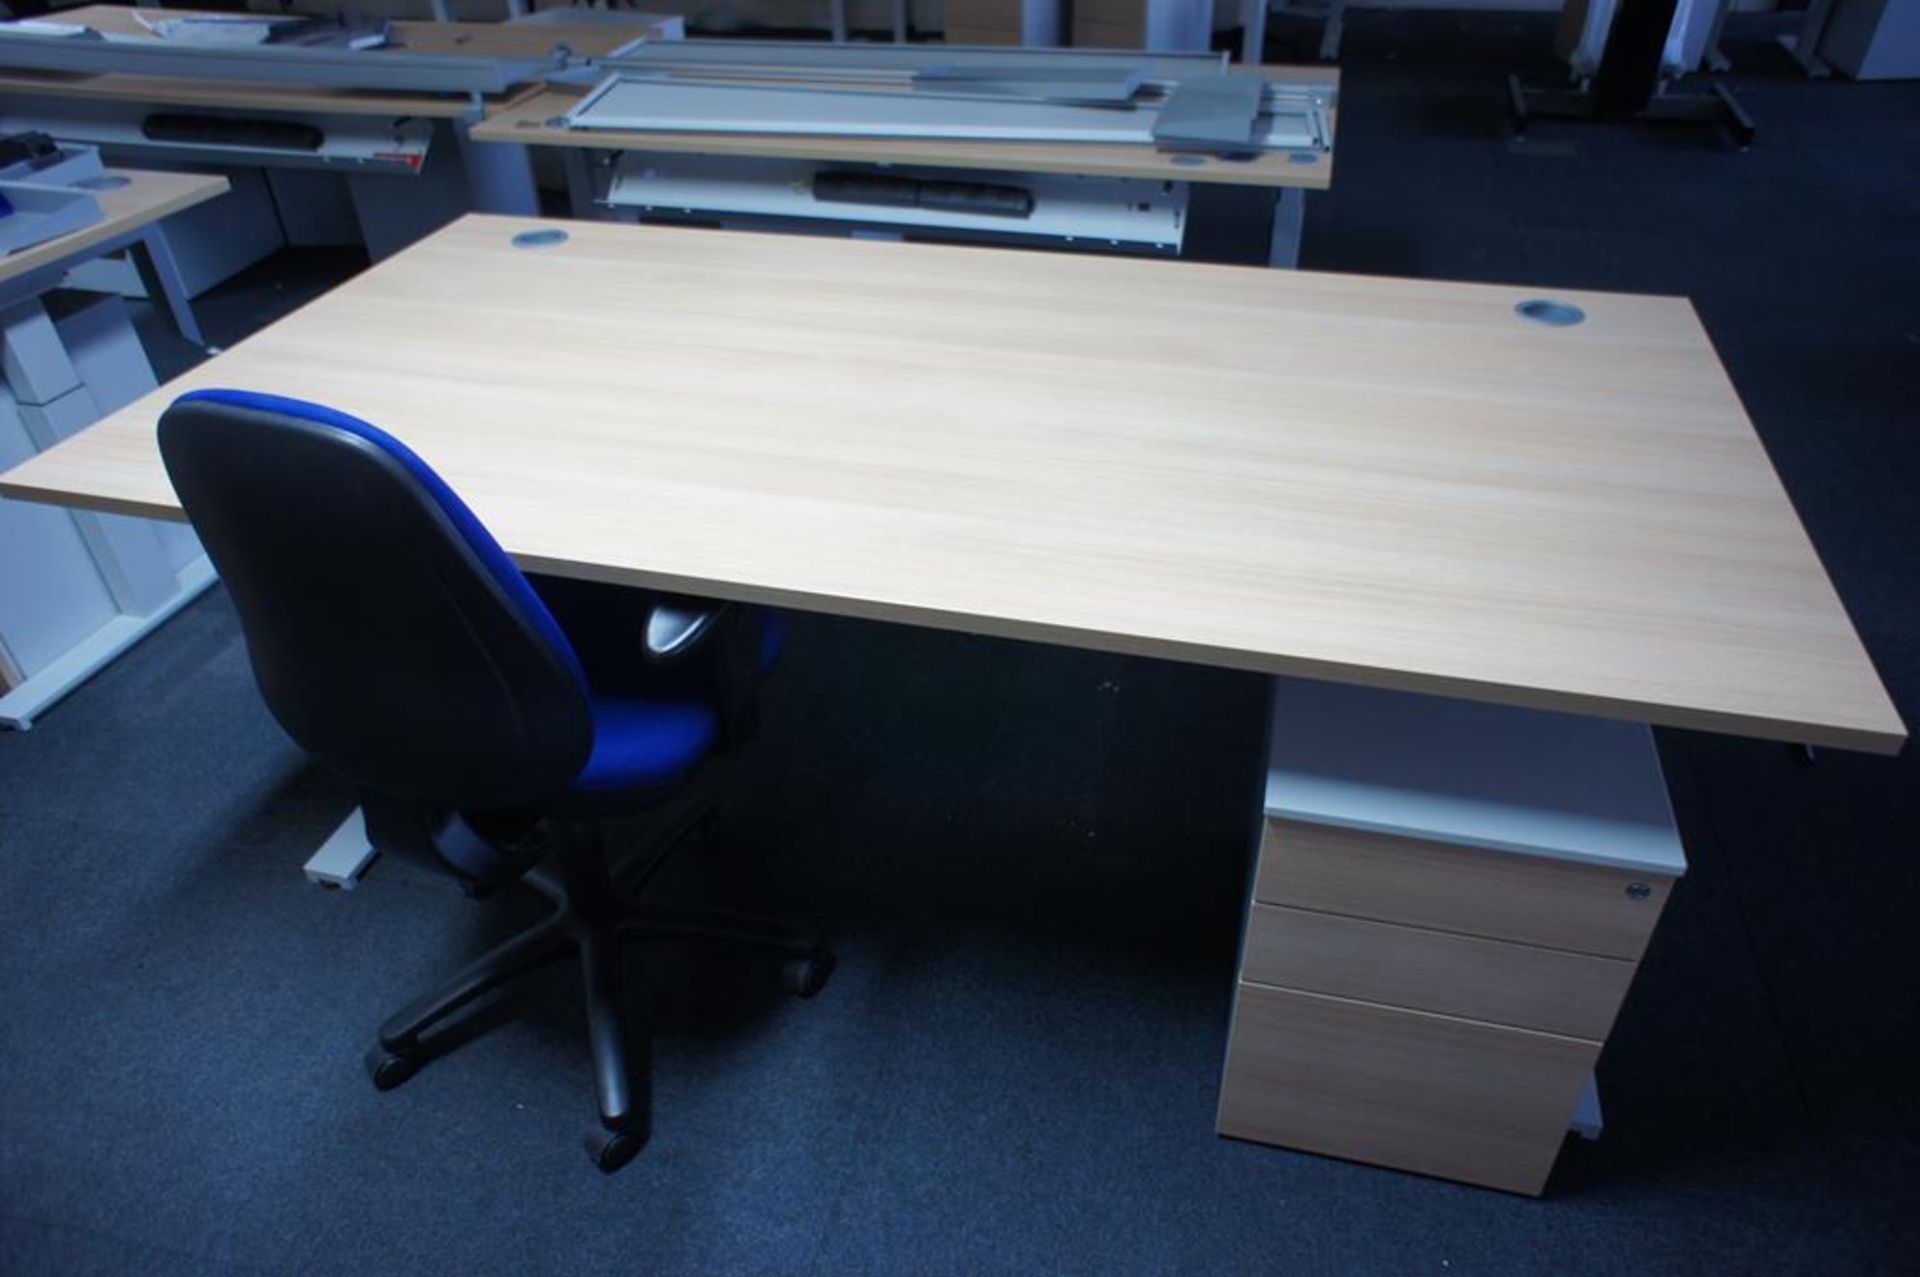 * Oak Effect Compiler Desk 2000 x 1000 with Rise & Fall adjustment with matching pedestal &